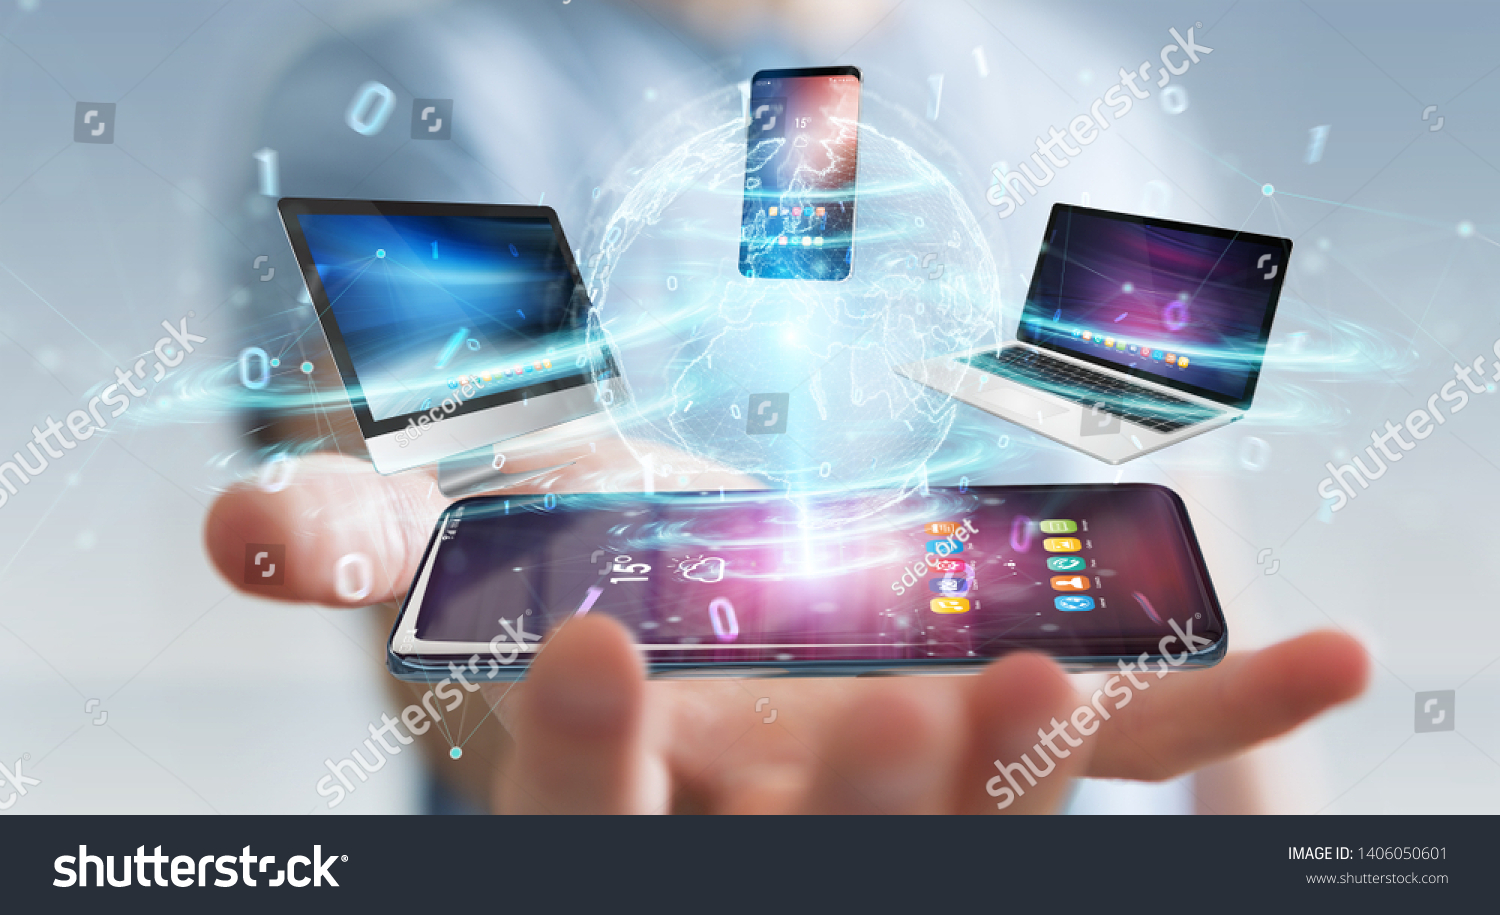 Modern devices connected to each other in businessman hand 3D rendering #1406050601